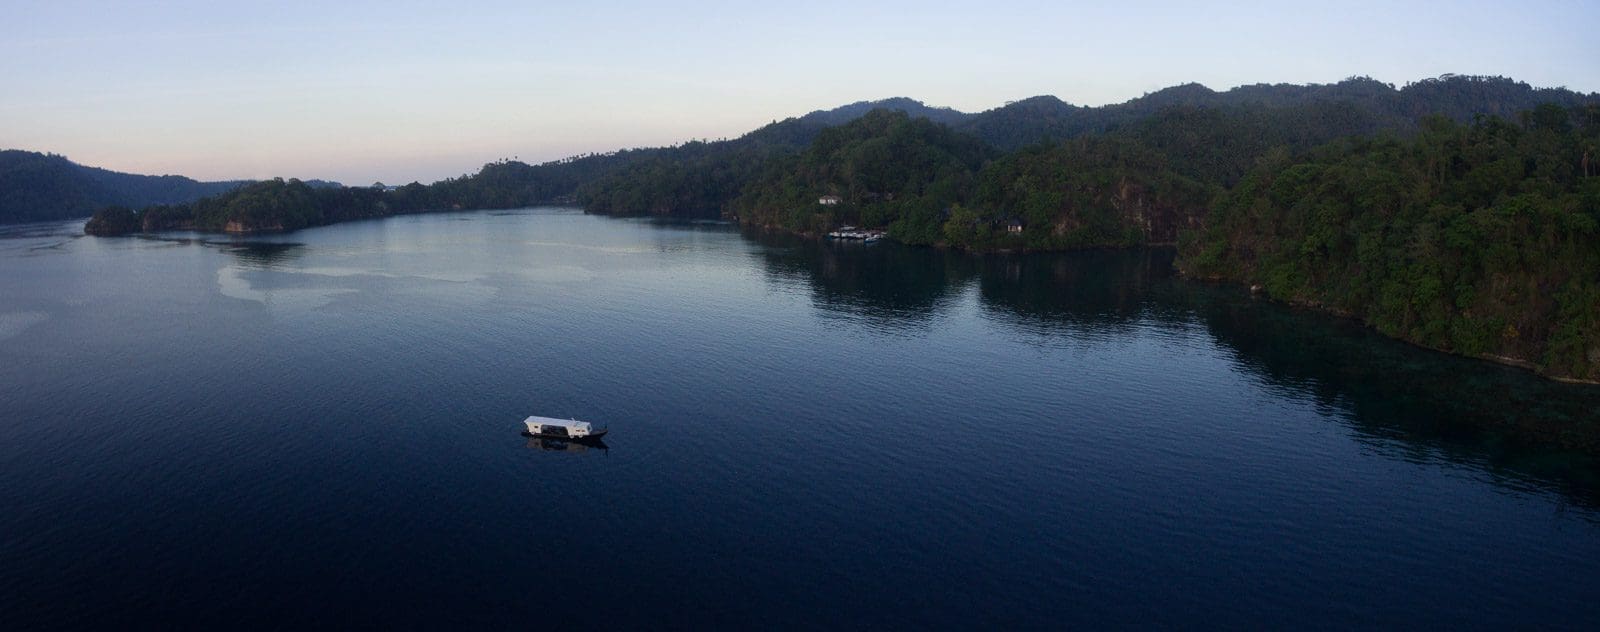 Cruising the calm waters of Lembeh Strait at dusk